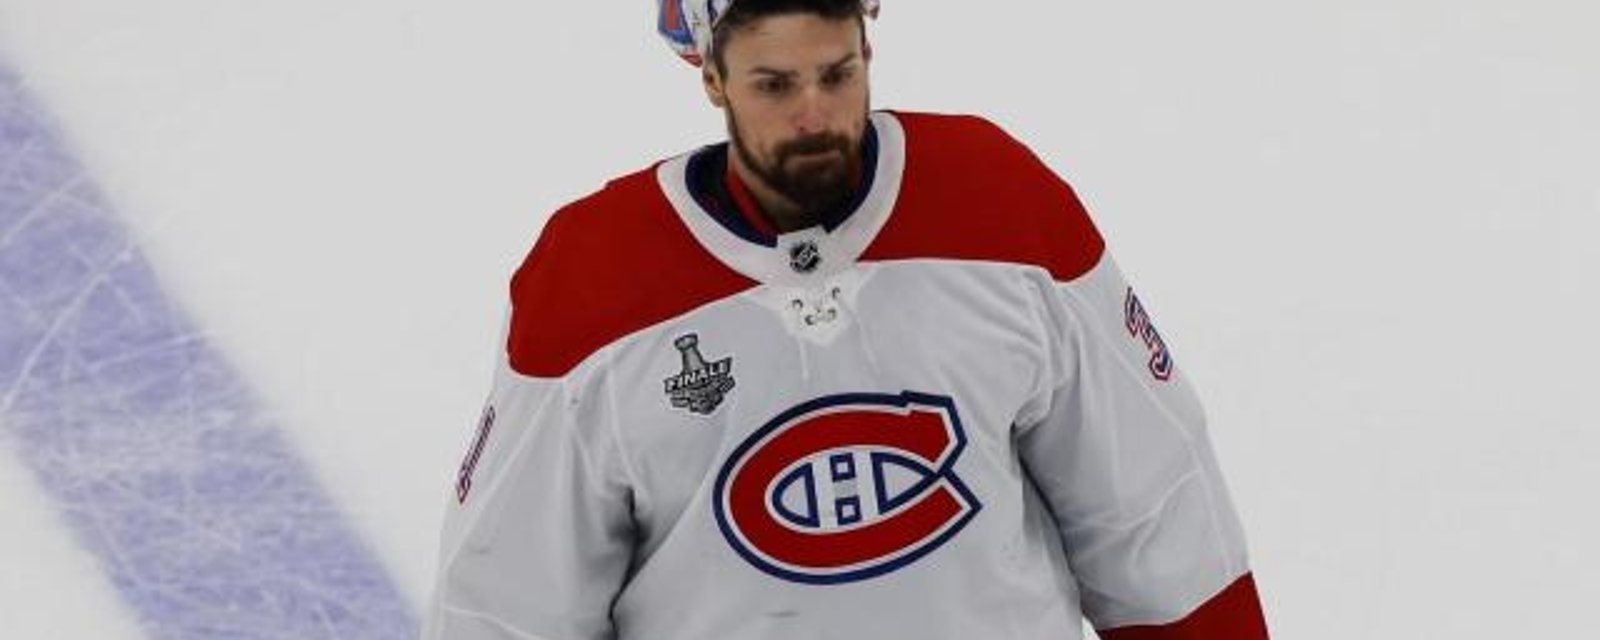 Latest update on Carey Price leaves fans and team helpless 